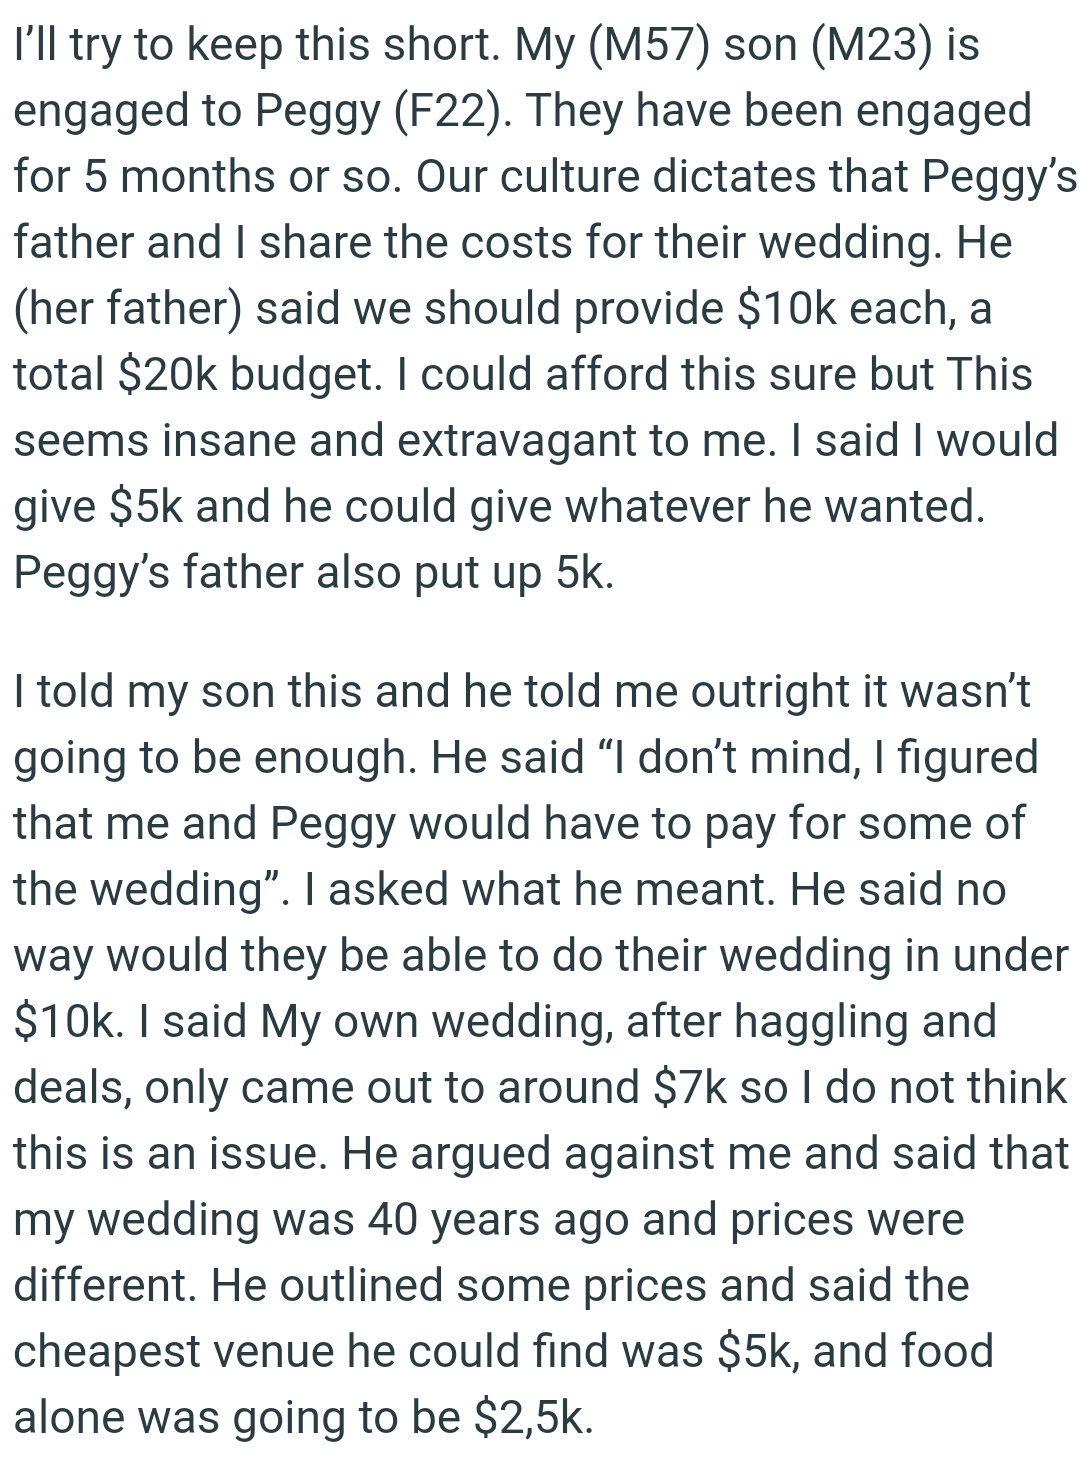 The OP figured that him and his soon-to-be wife would have to pay for some of the wedding